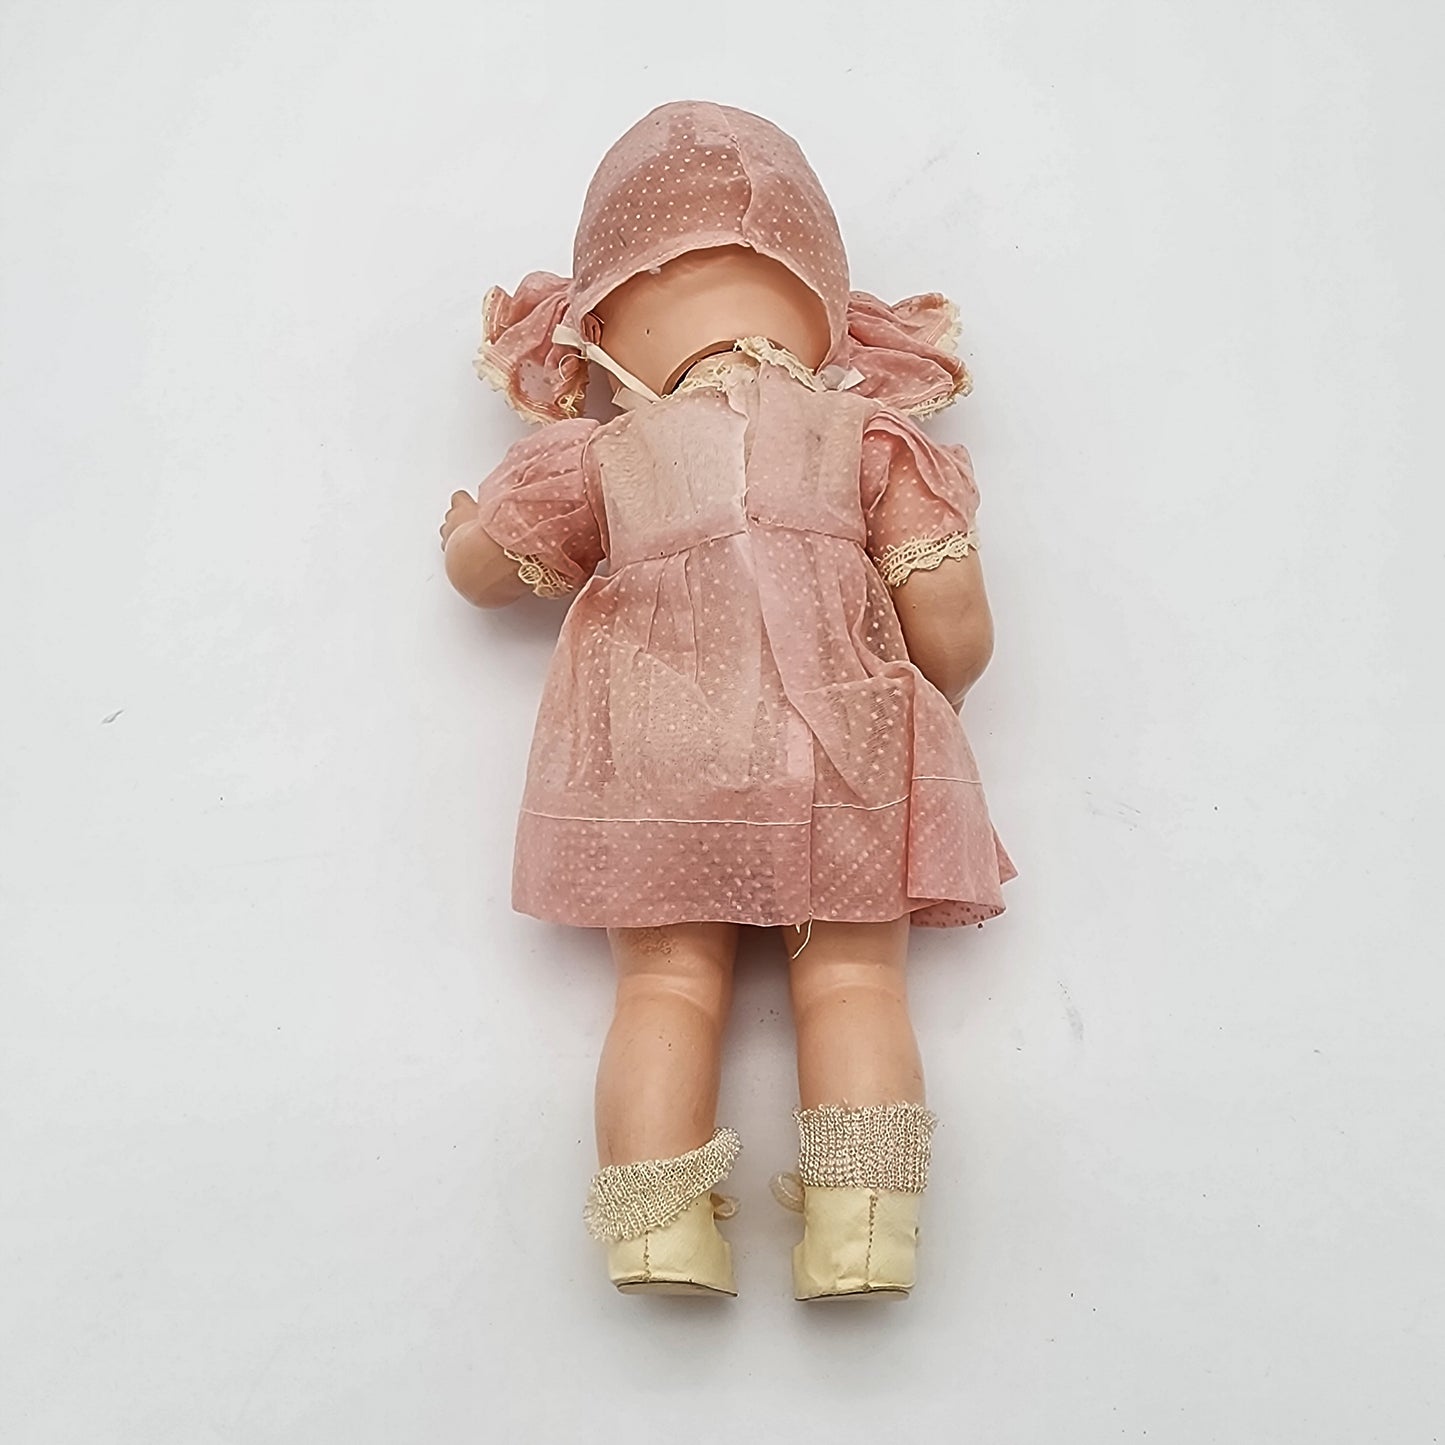 1940's Effanbee Composition Doll